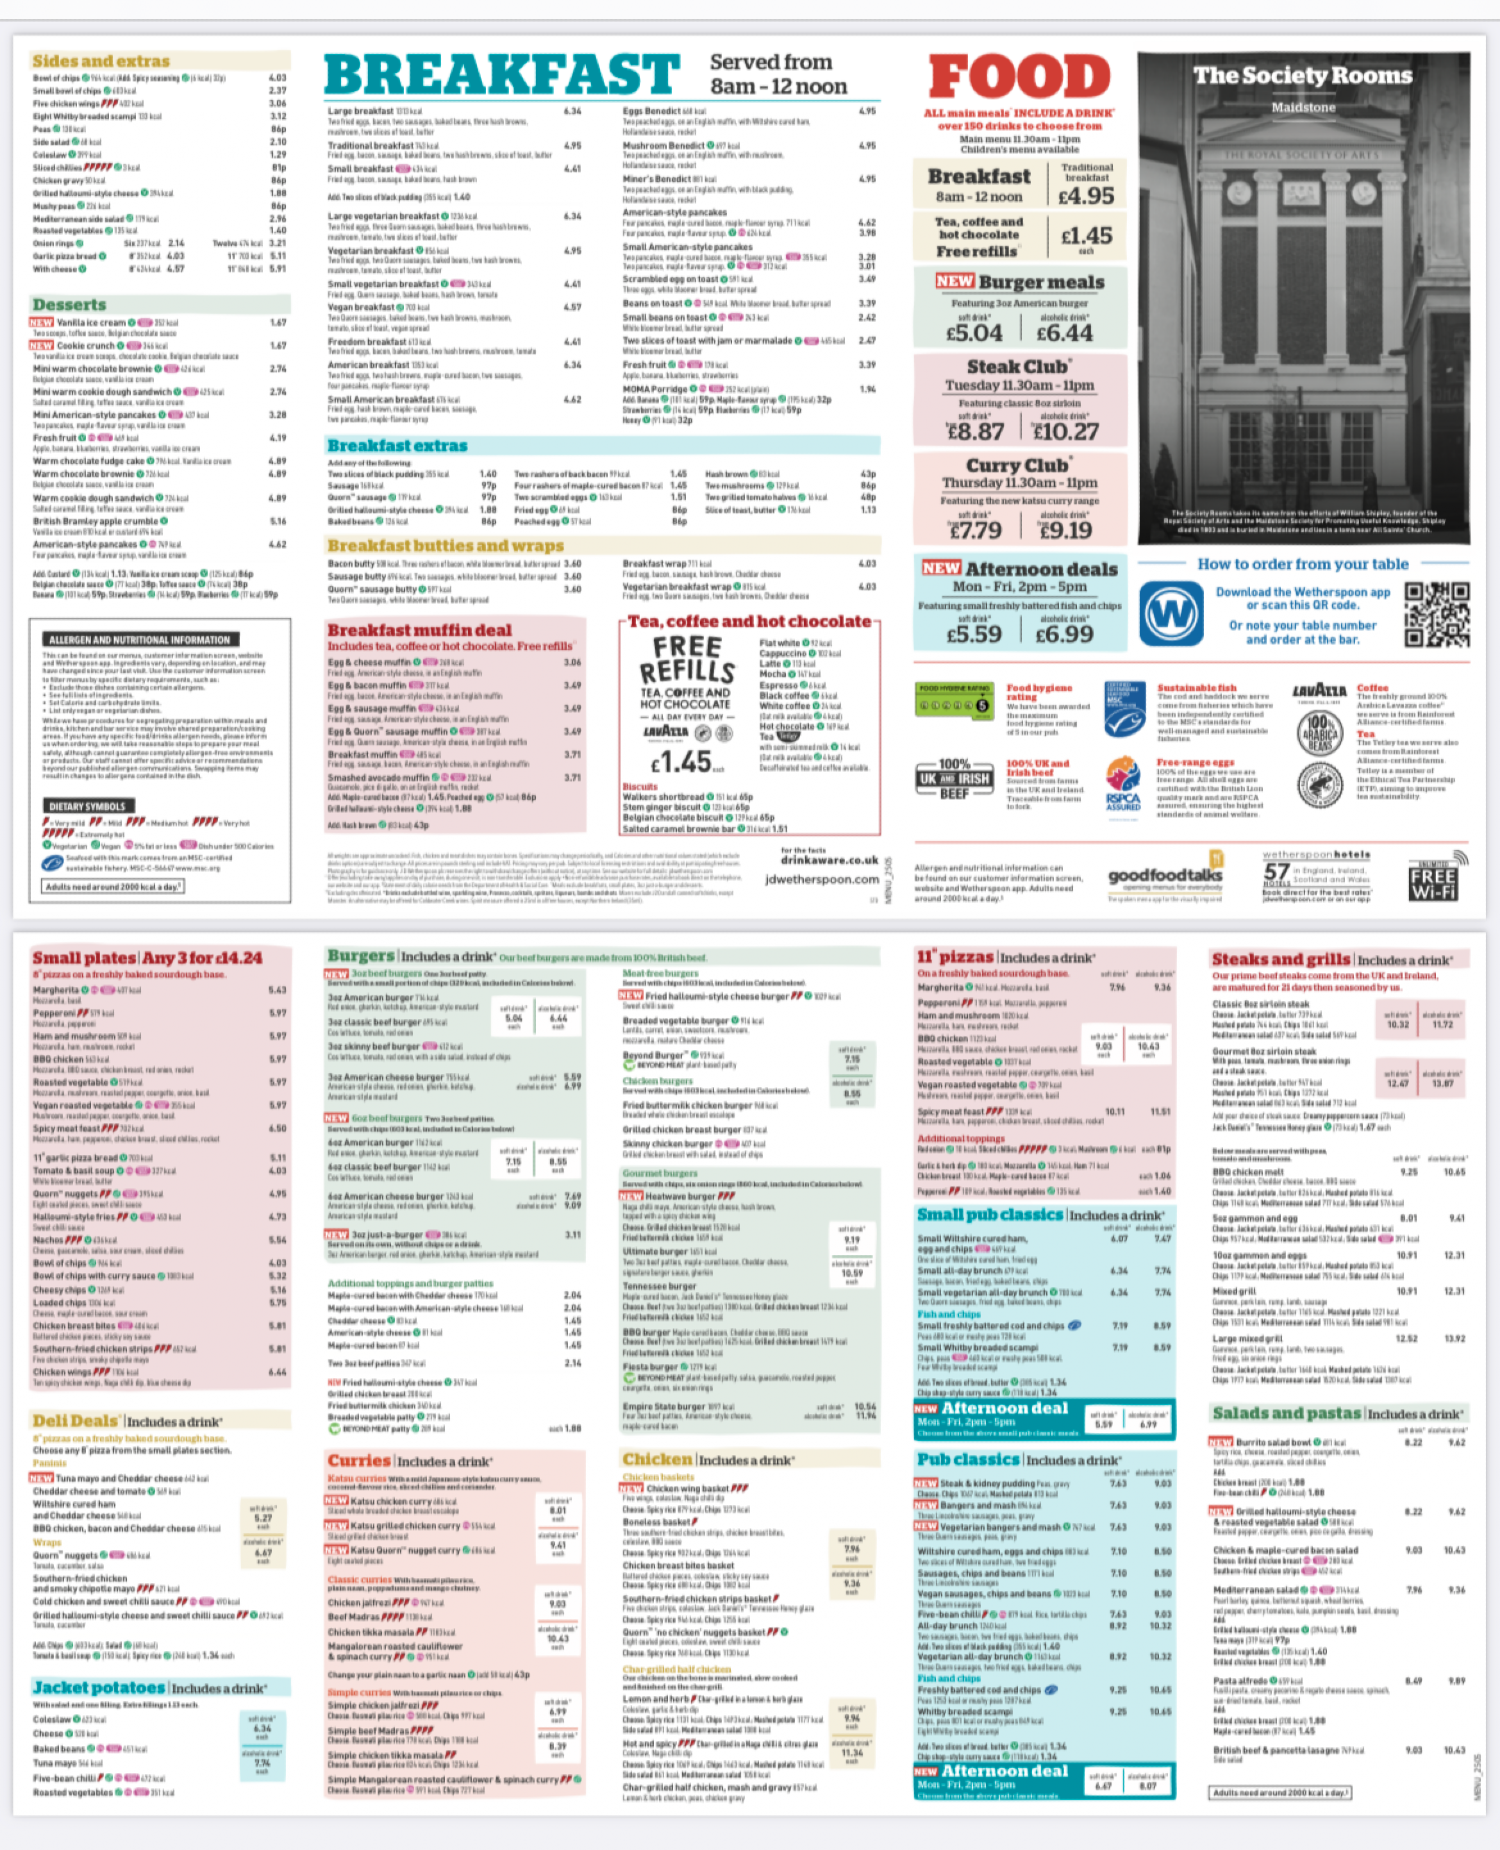 Takeaway Restaurant Menu Page - Wetherspoons – The Society Rooms - Maidstone